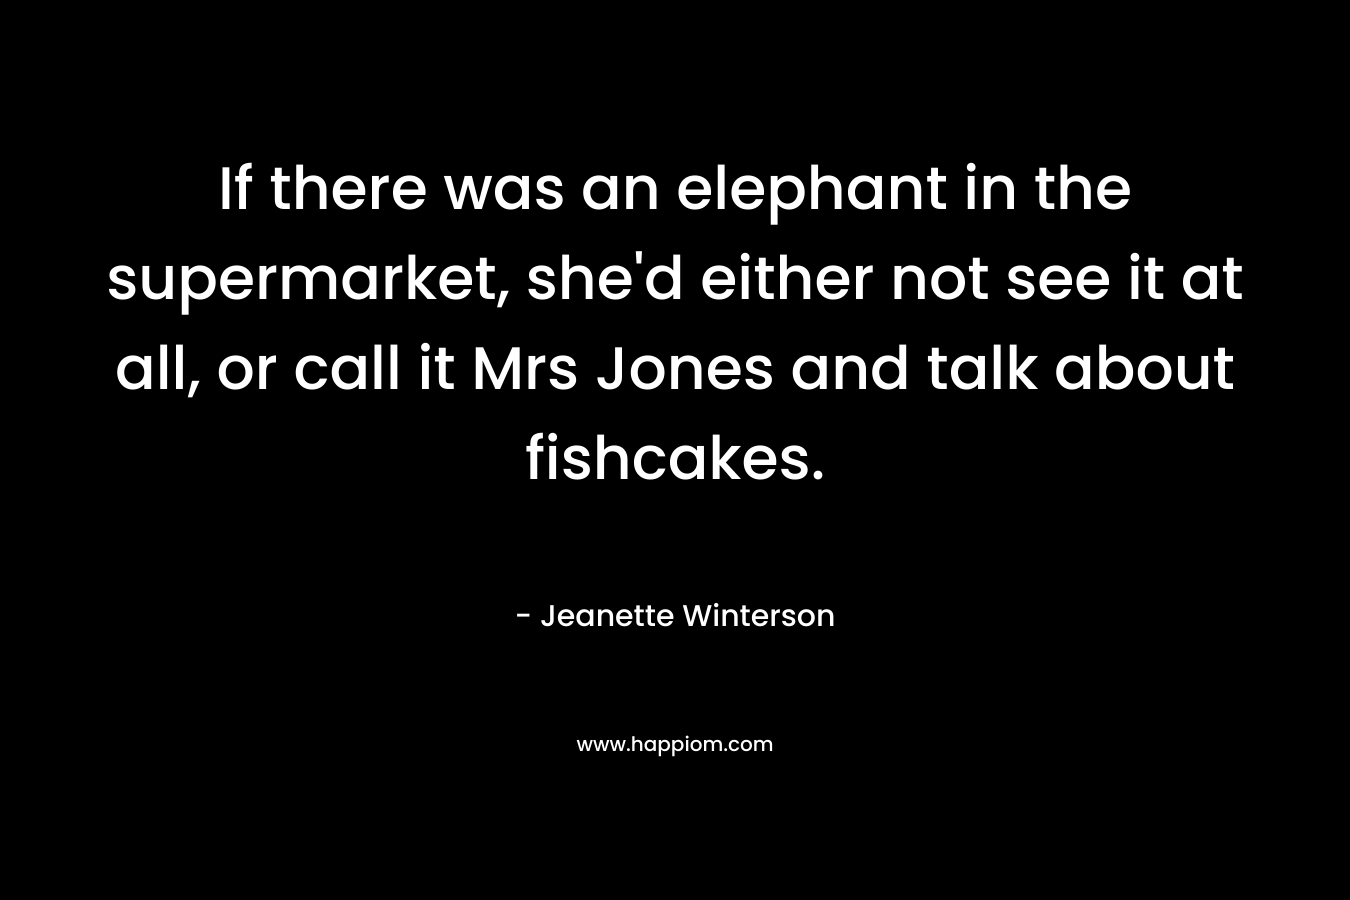 If there was an elephant in the supermarket, she'd either not see it at all, or call it Mrs Jones and talk about fishcakes.